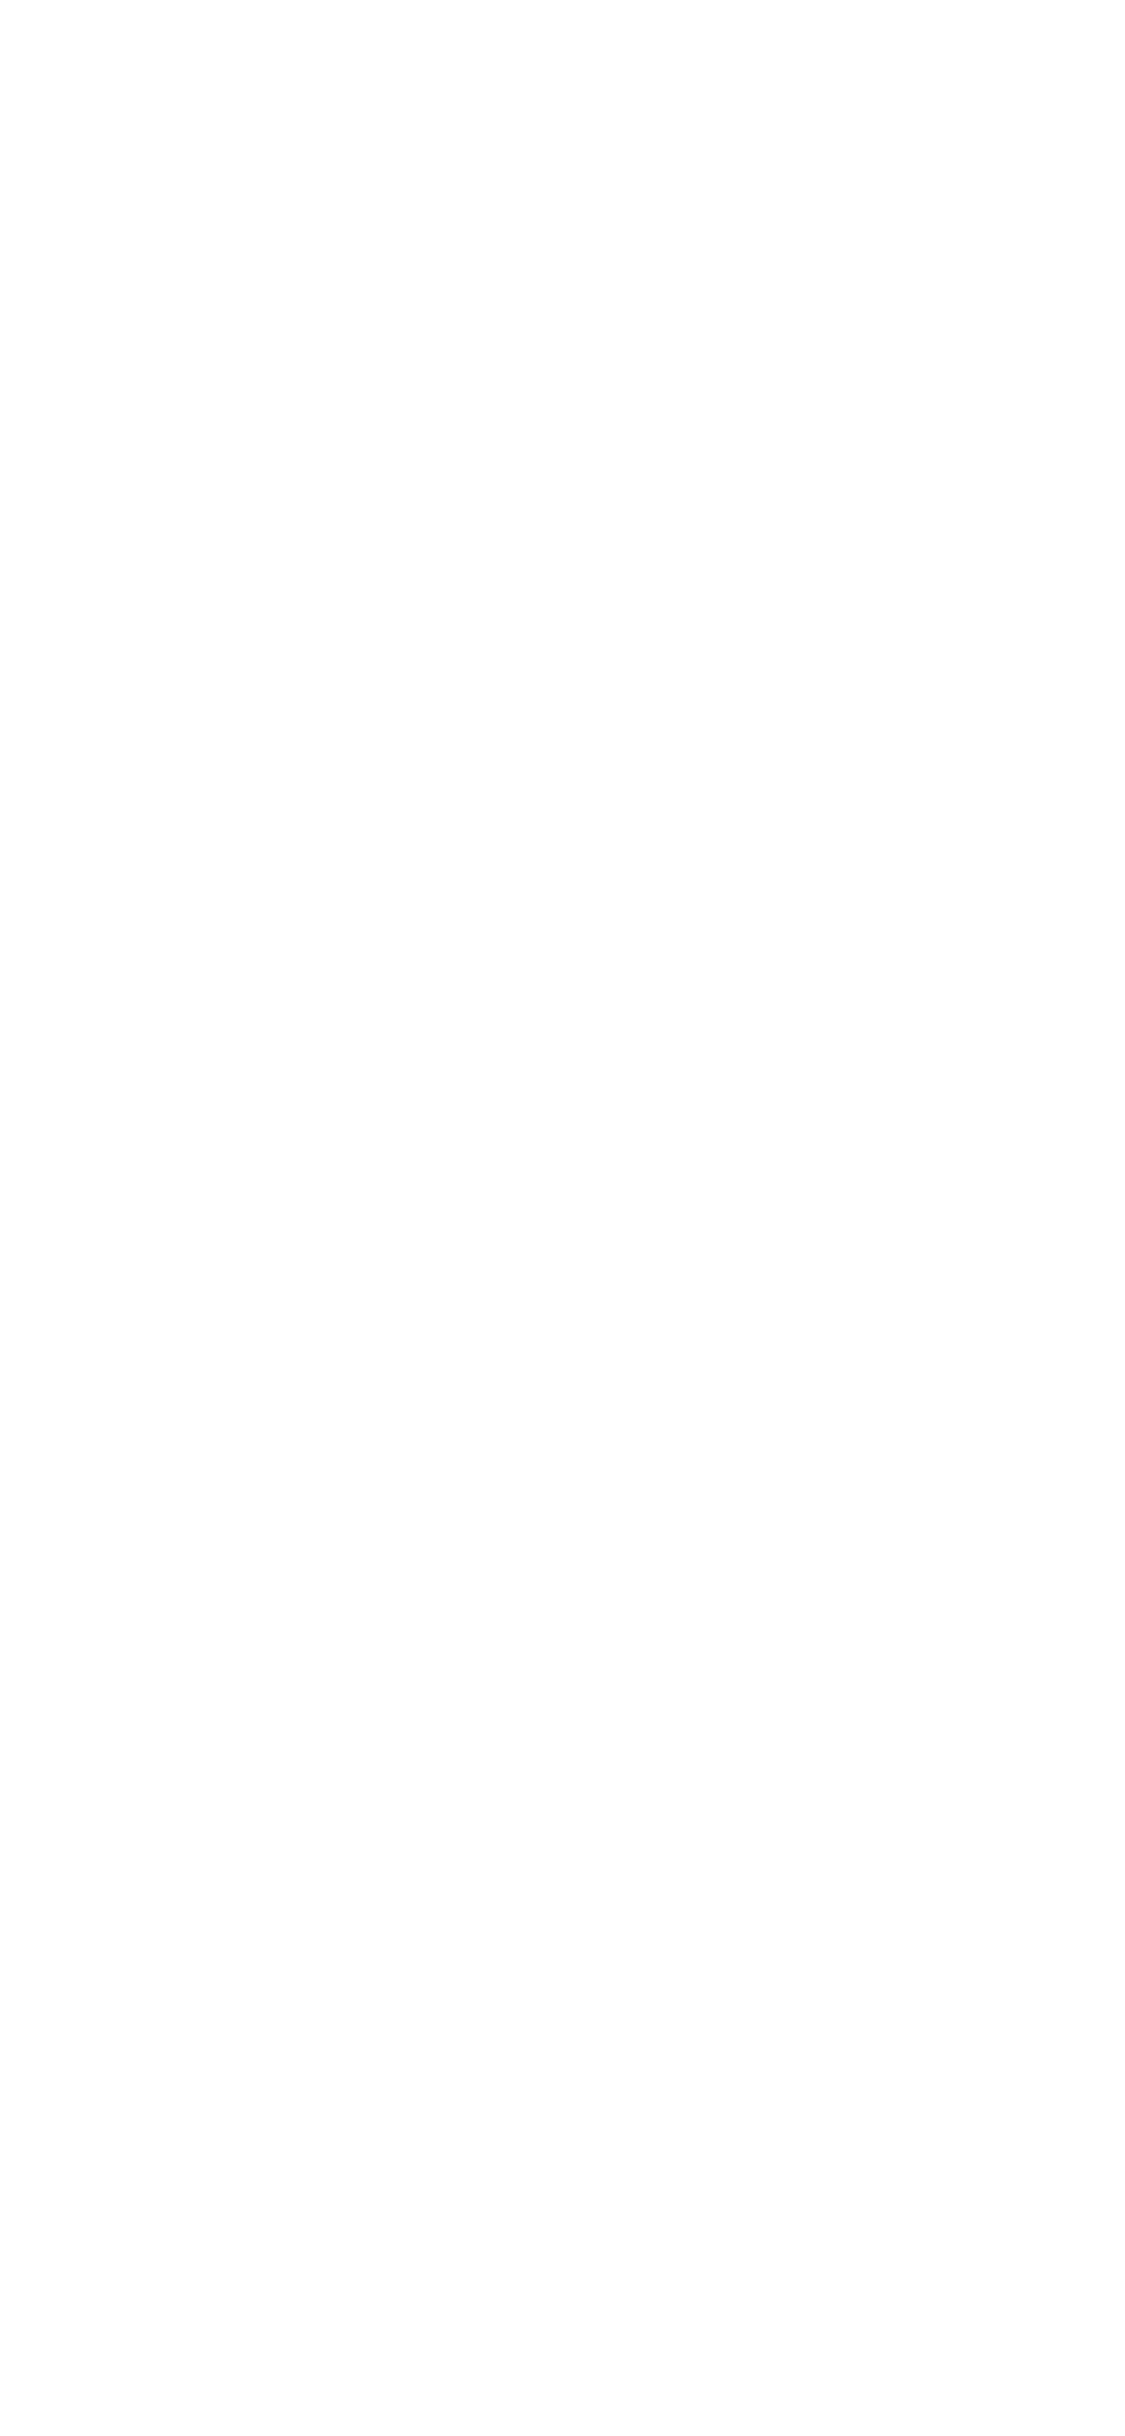 Providing the best service and sharing revenue最高のサービスを提供し、収益を皆でわかちあう